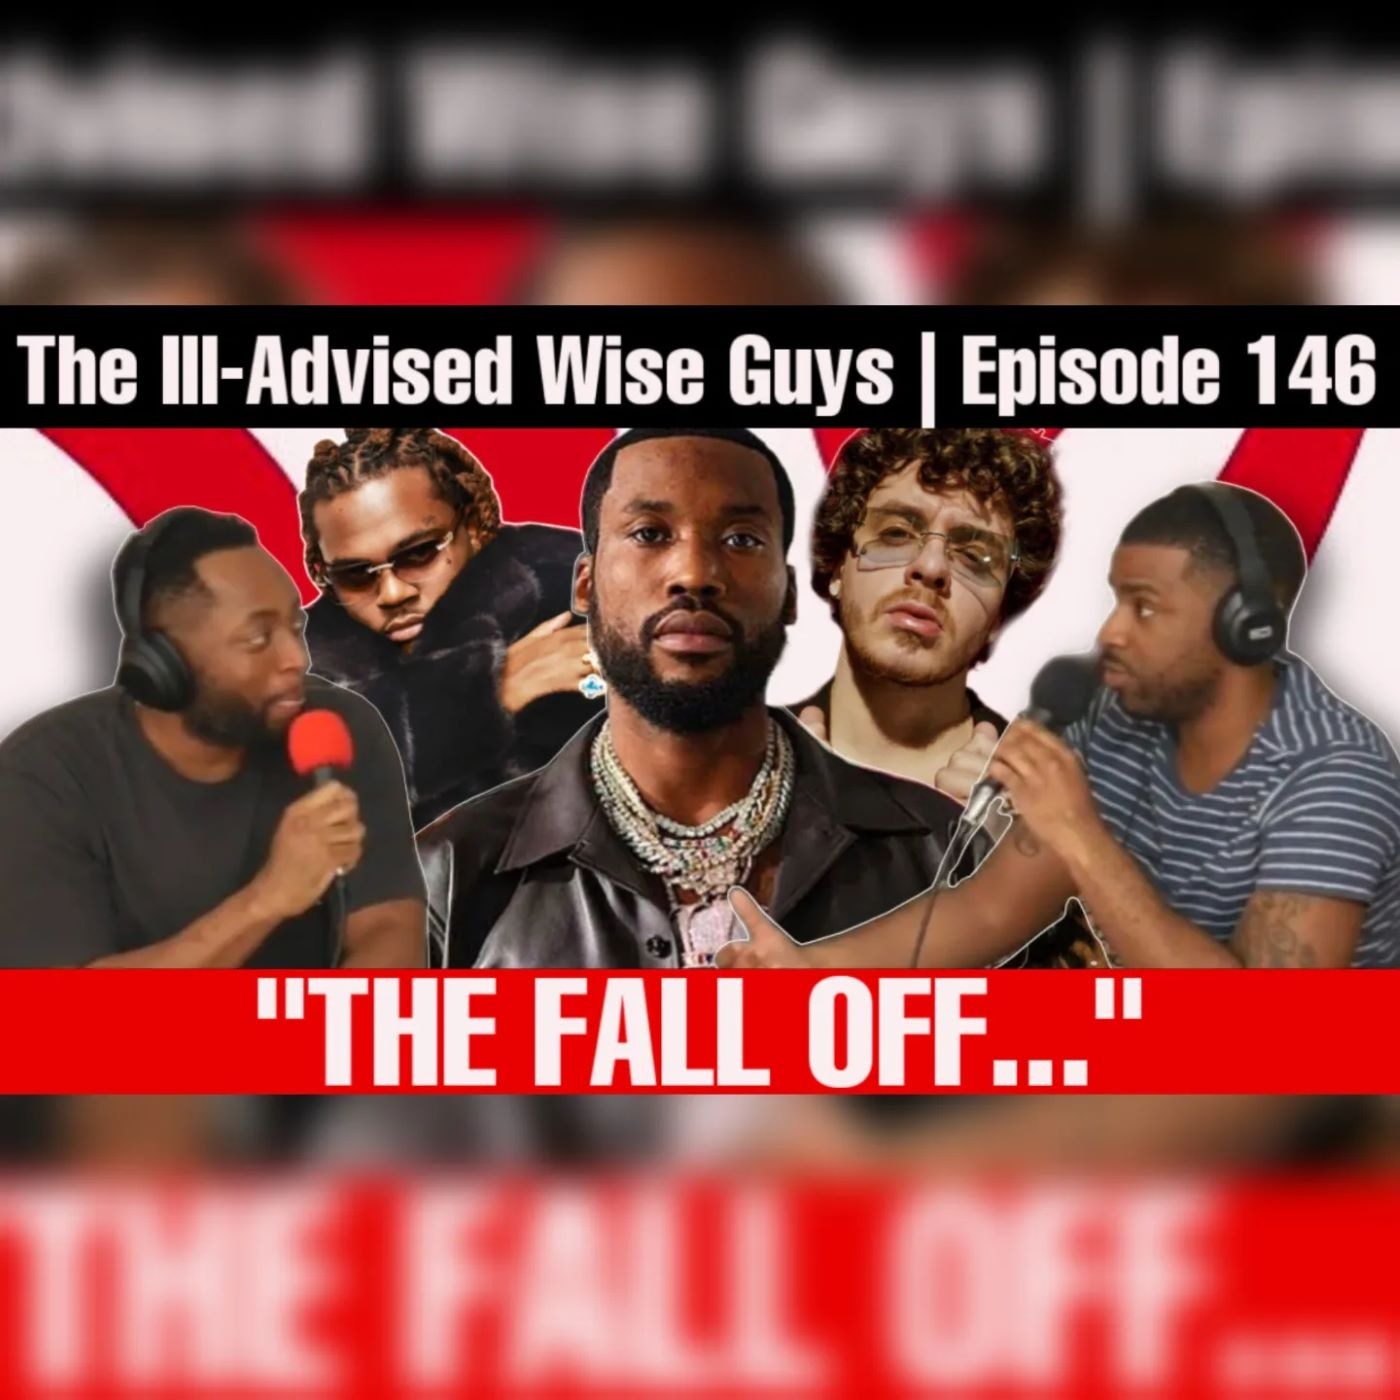 Episode 146 - "The Fall Off..."